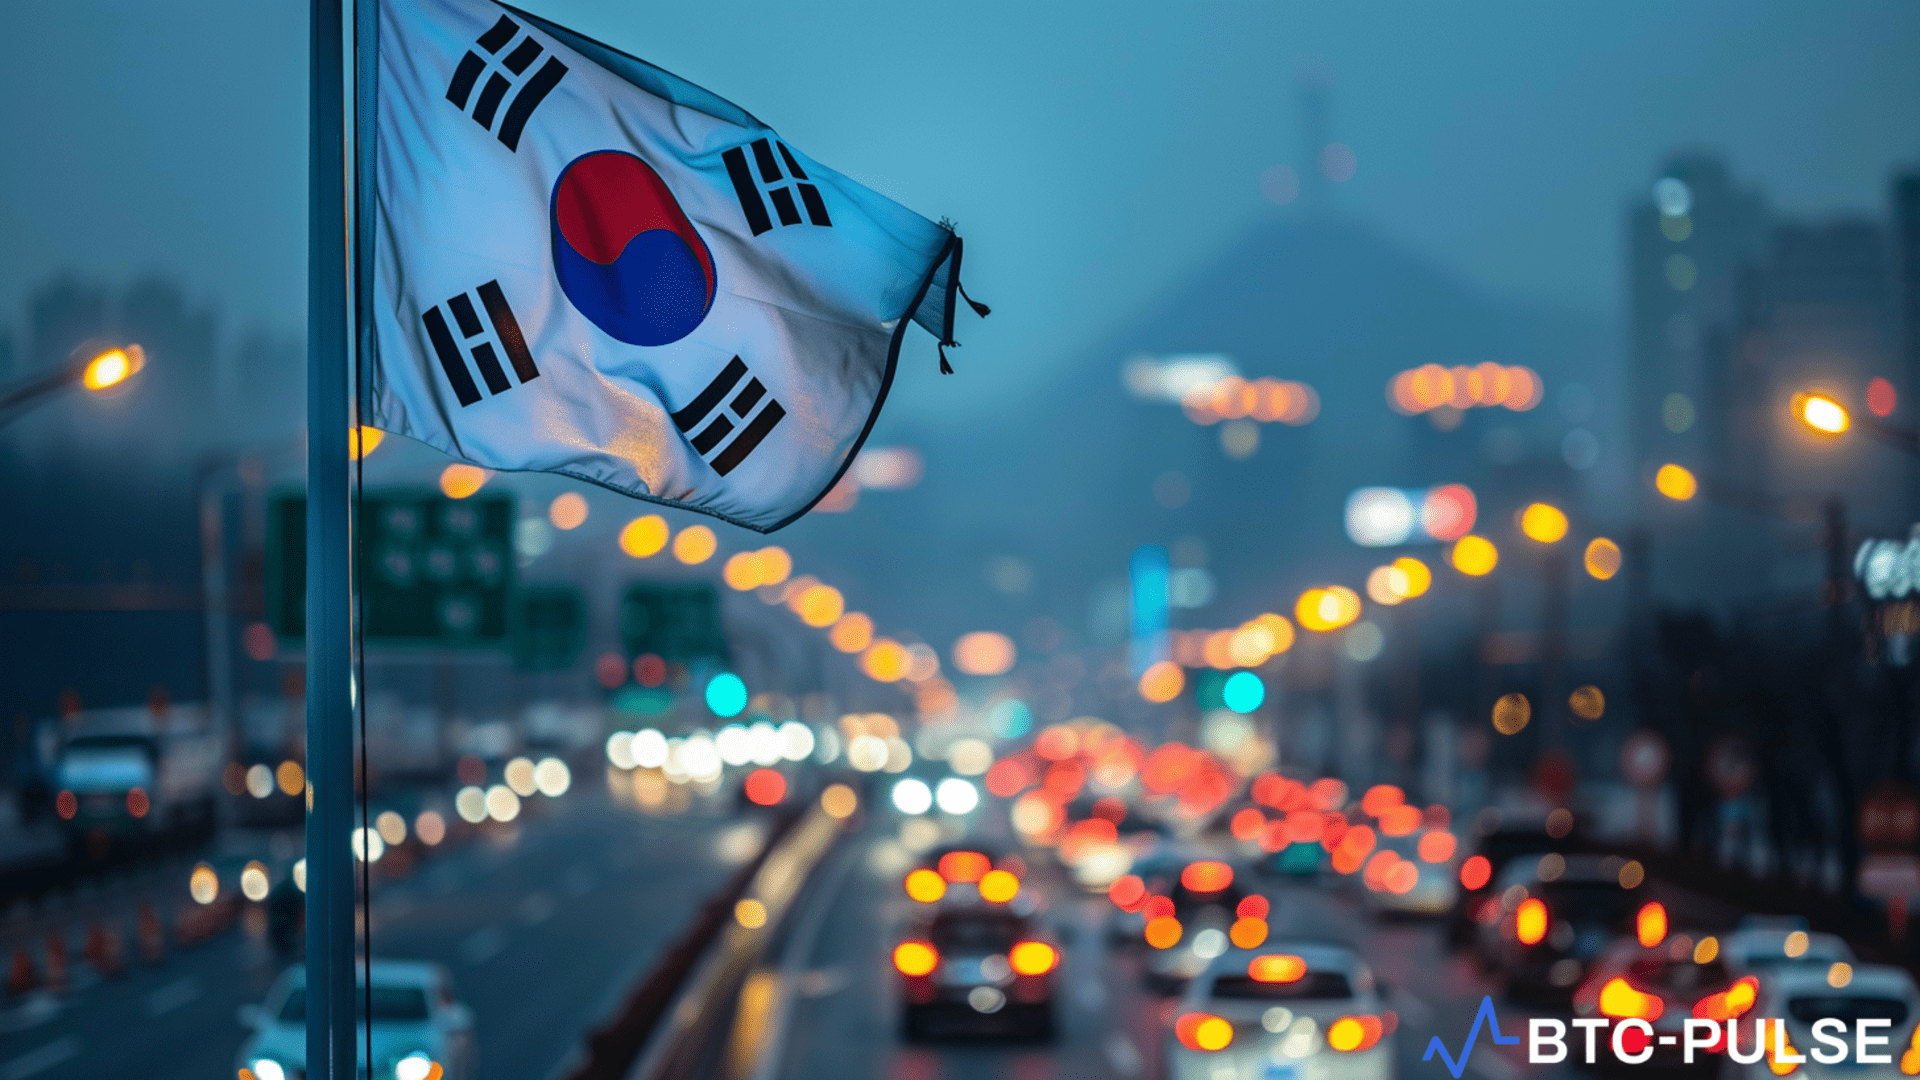 Korean Crypto Exchanges to Avoid ‘Mass Delistings’ Despite New Rules